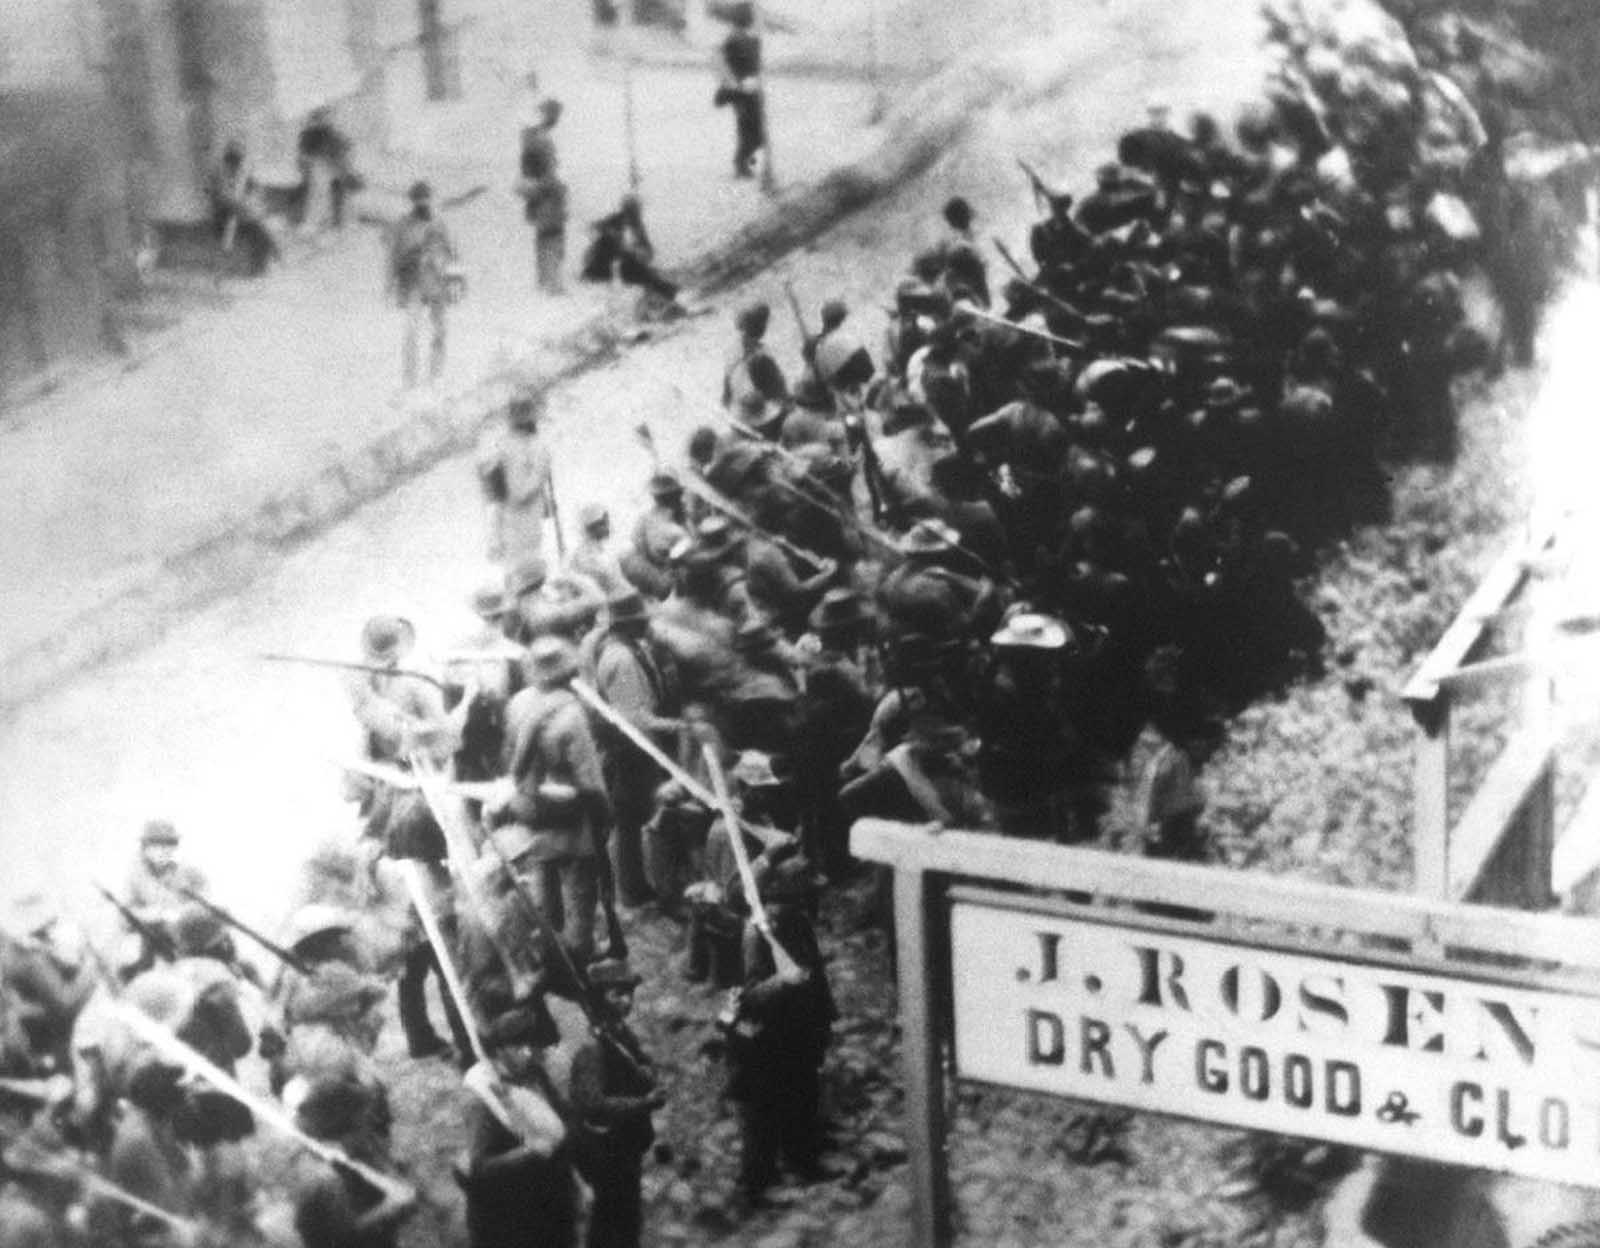 Confederate Soldiers on the march through enemy occupied Frederick, Maryland in 1862.